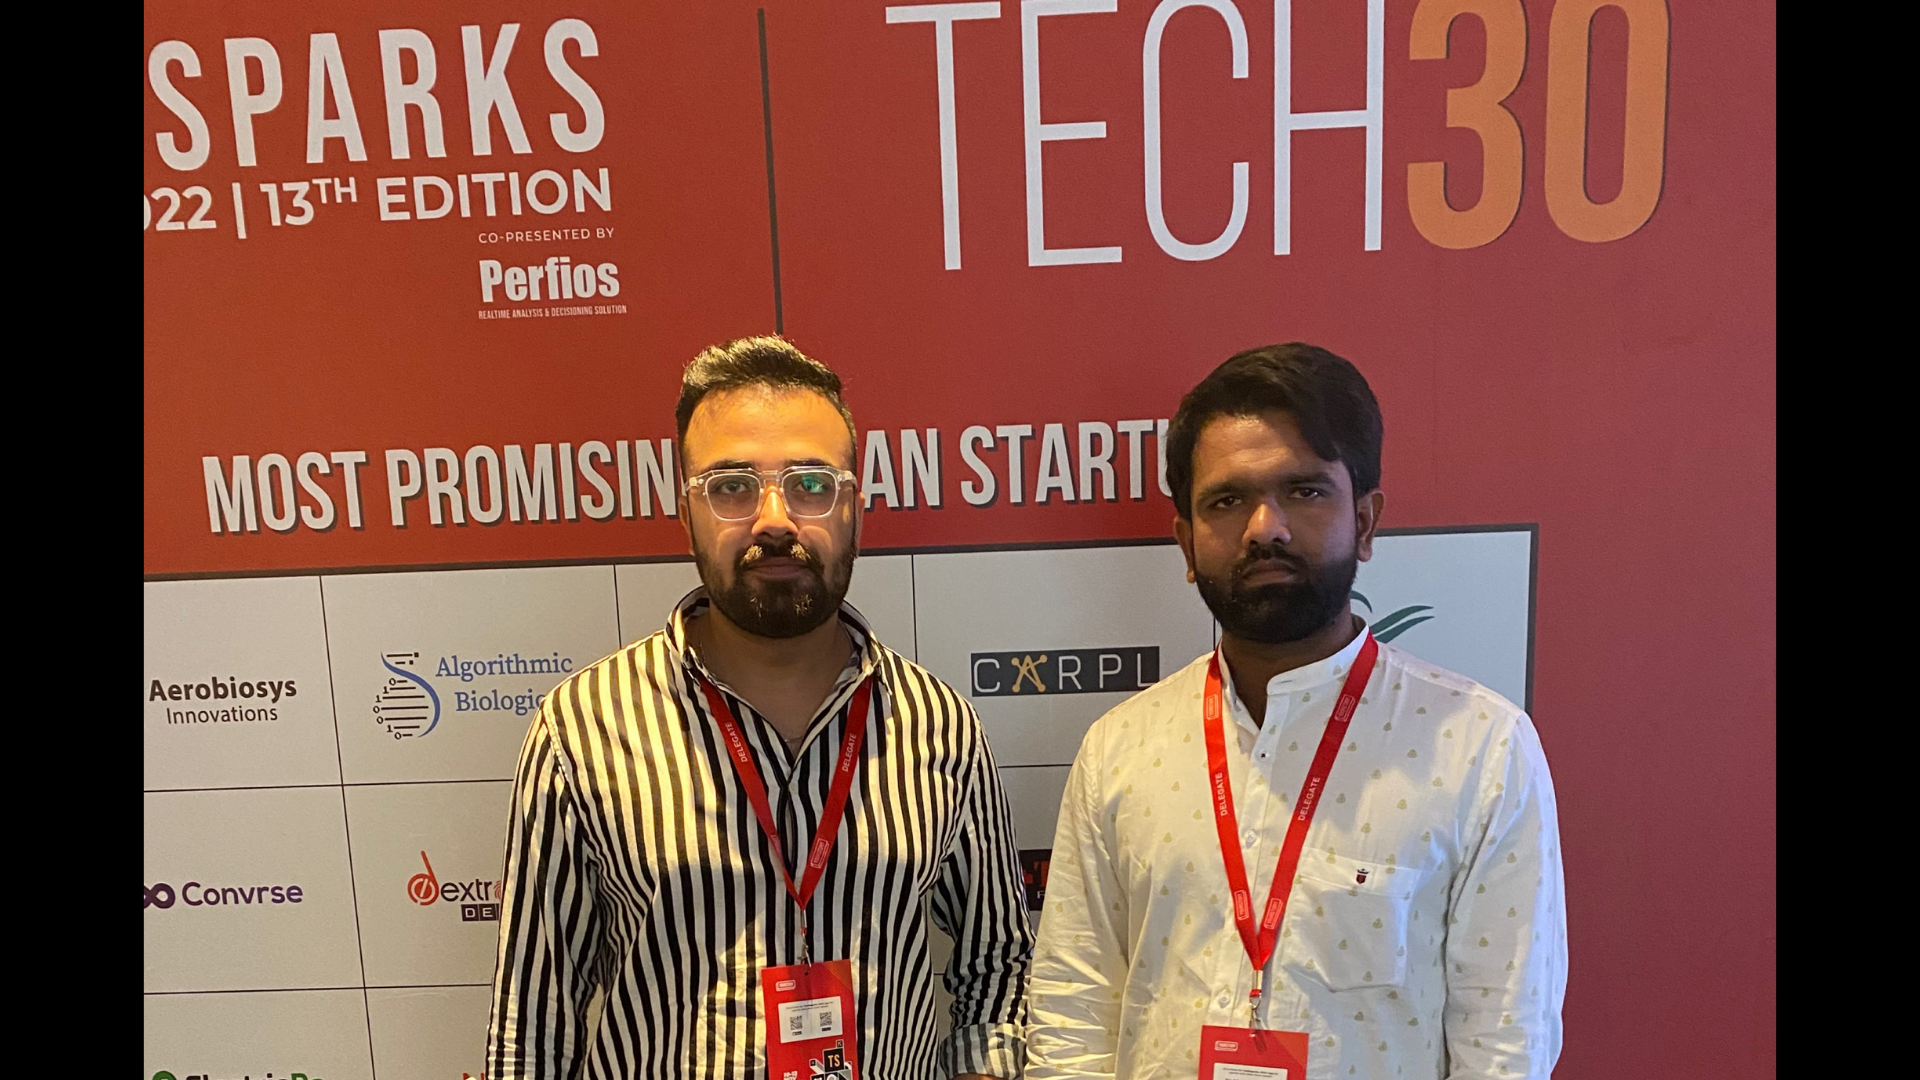 Anuyat met the best of businesses at TechSparks 2022, 13th Edition